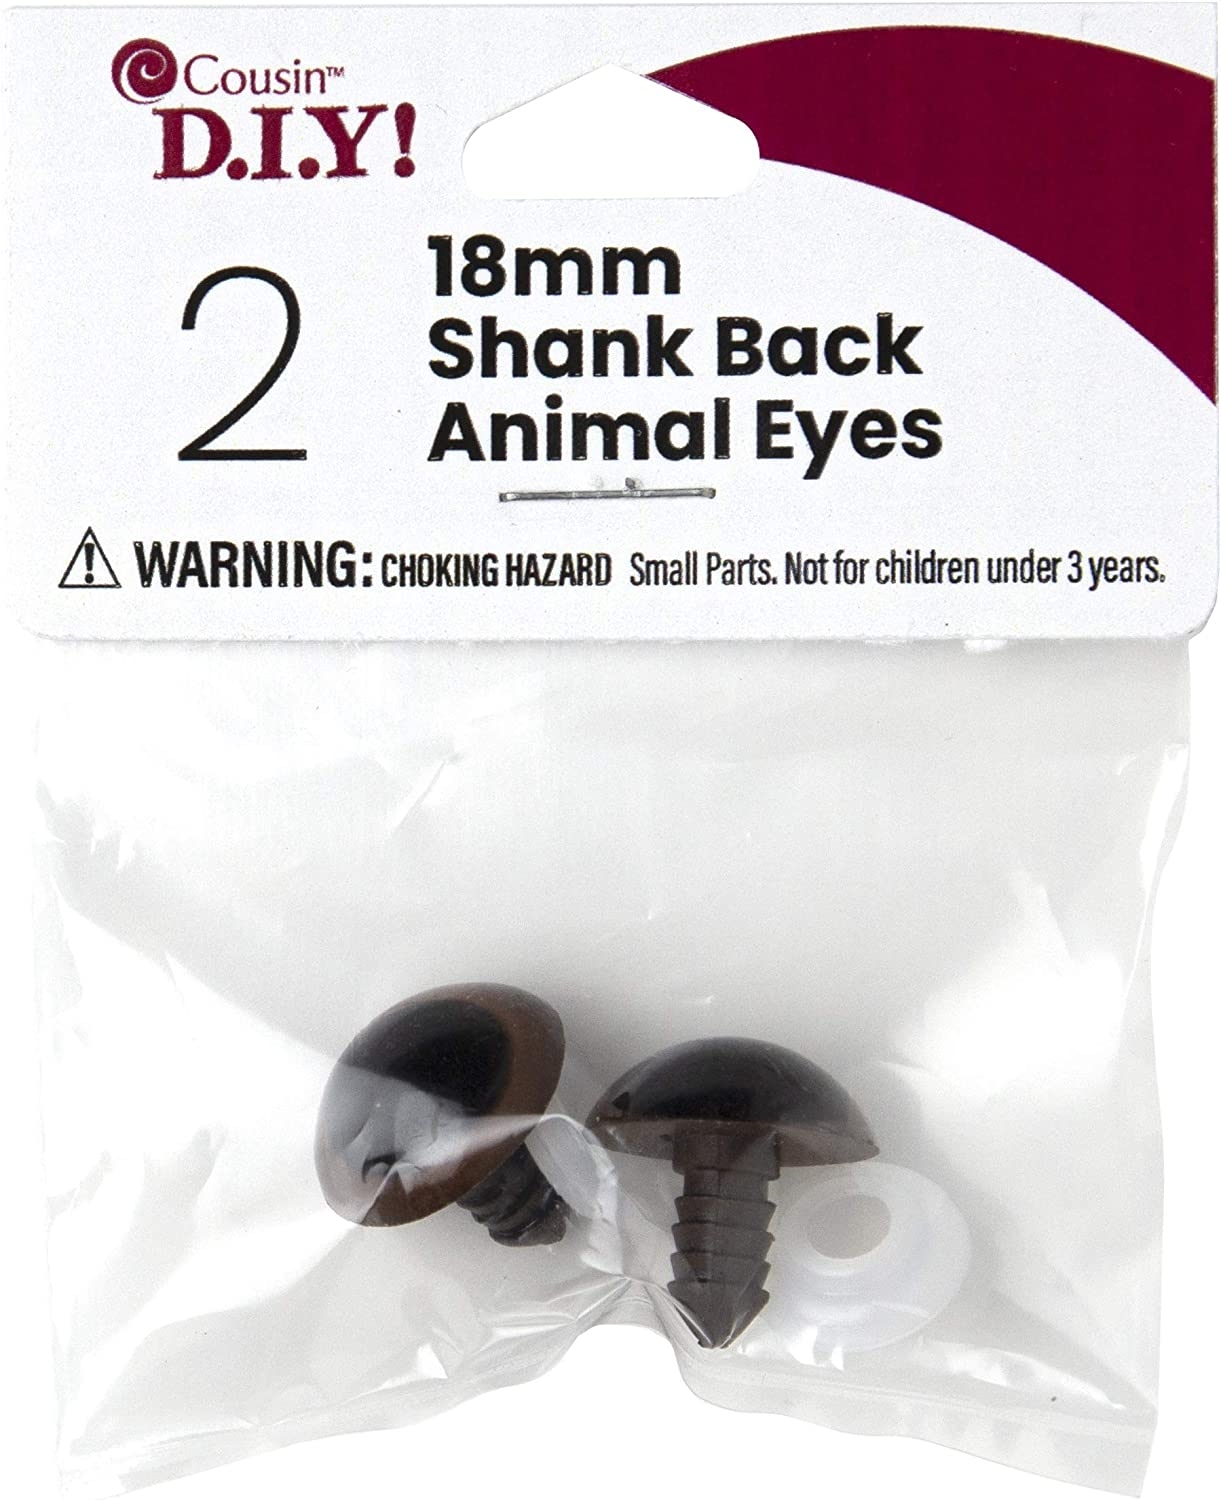 Cousin DIY Shank Back Animal Eye 18mm 2PC, Black Import To Shop ×Product customization General Description Gallery Reviews